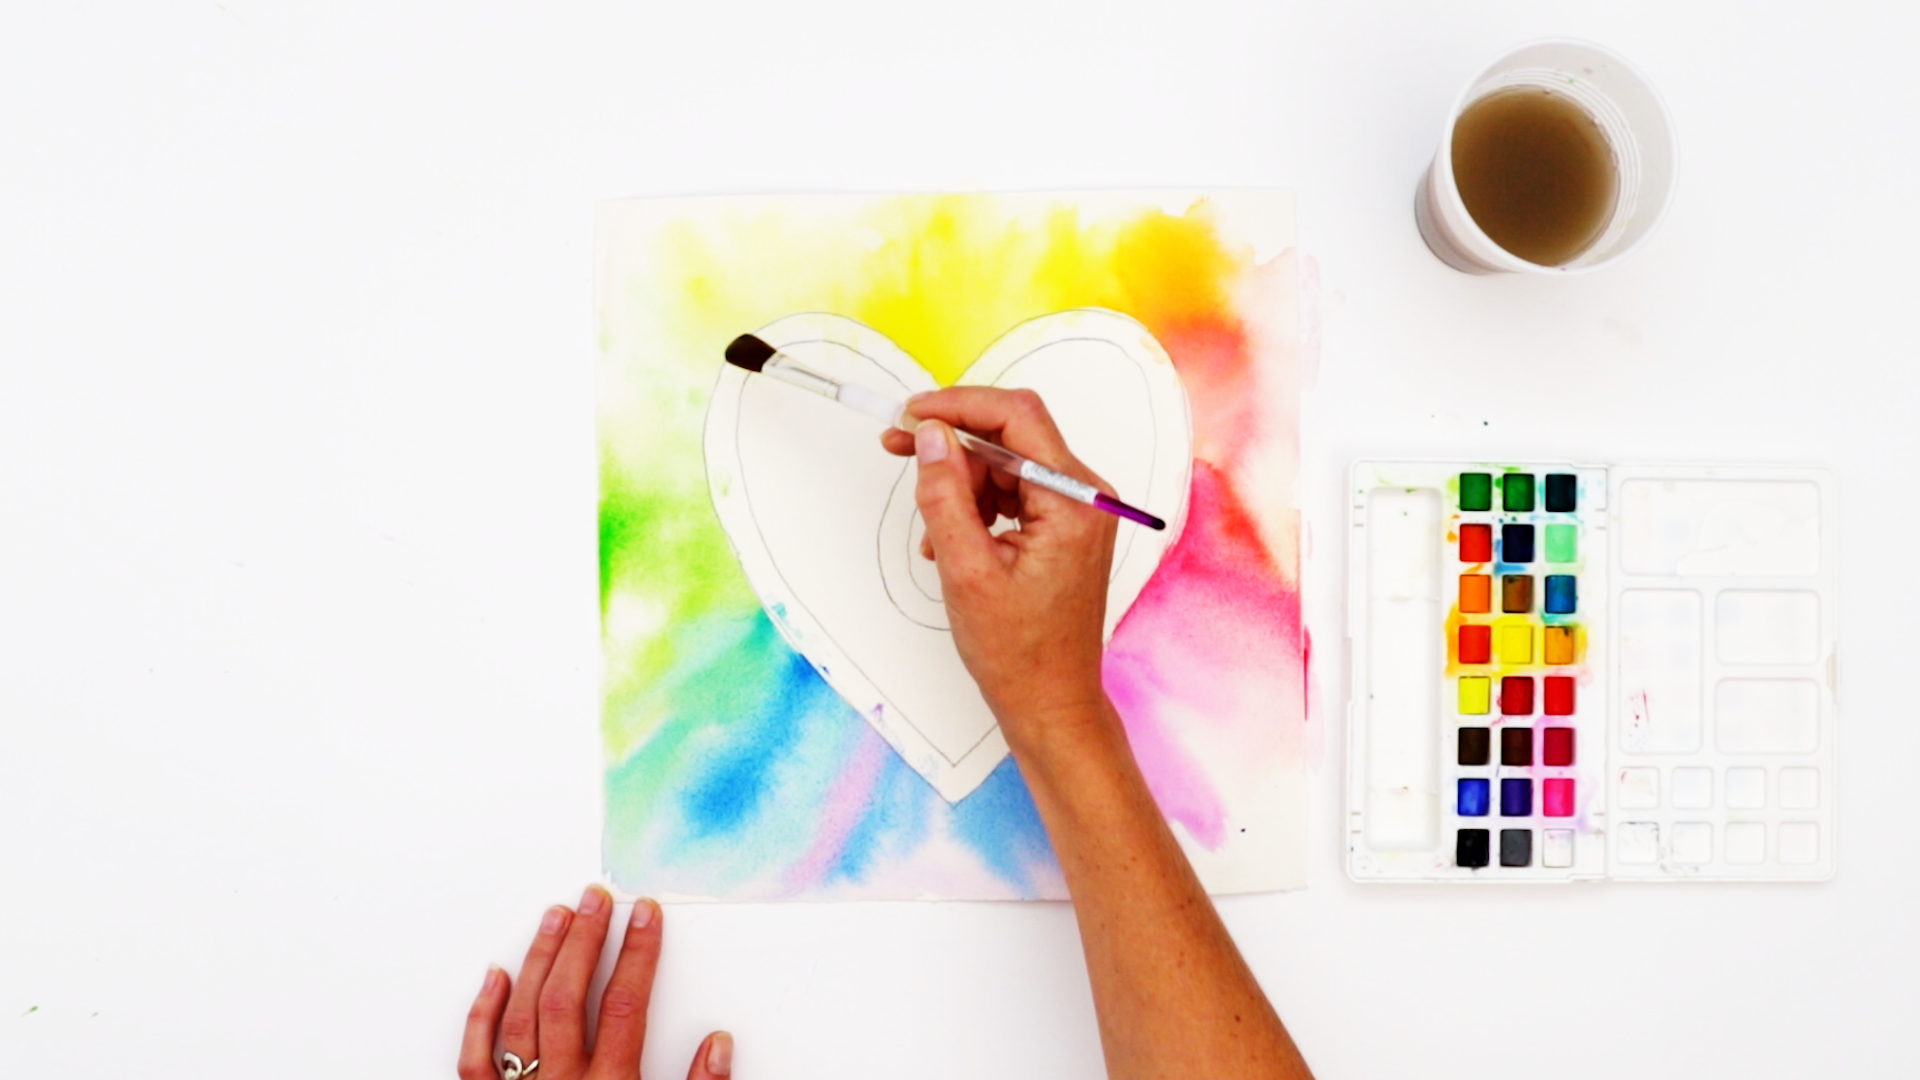 How To Resin Watercolor: Paint your image as you wish using watercolor paints